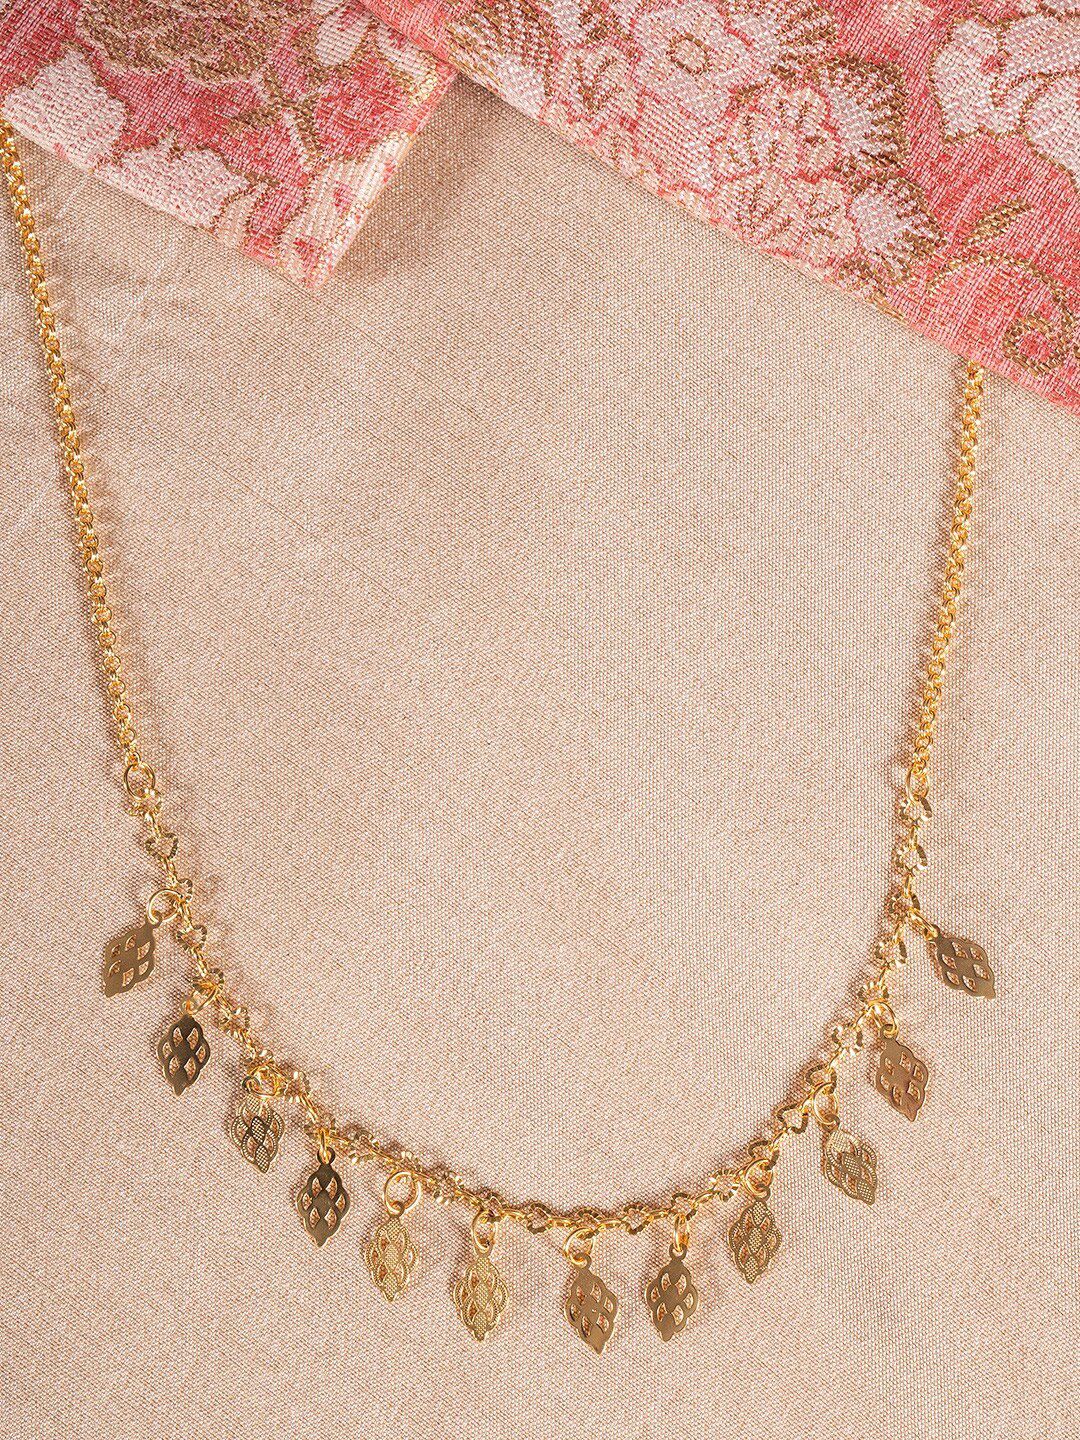 Shoshaa Gold-Toned & Plated Statement Necklace Price in India